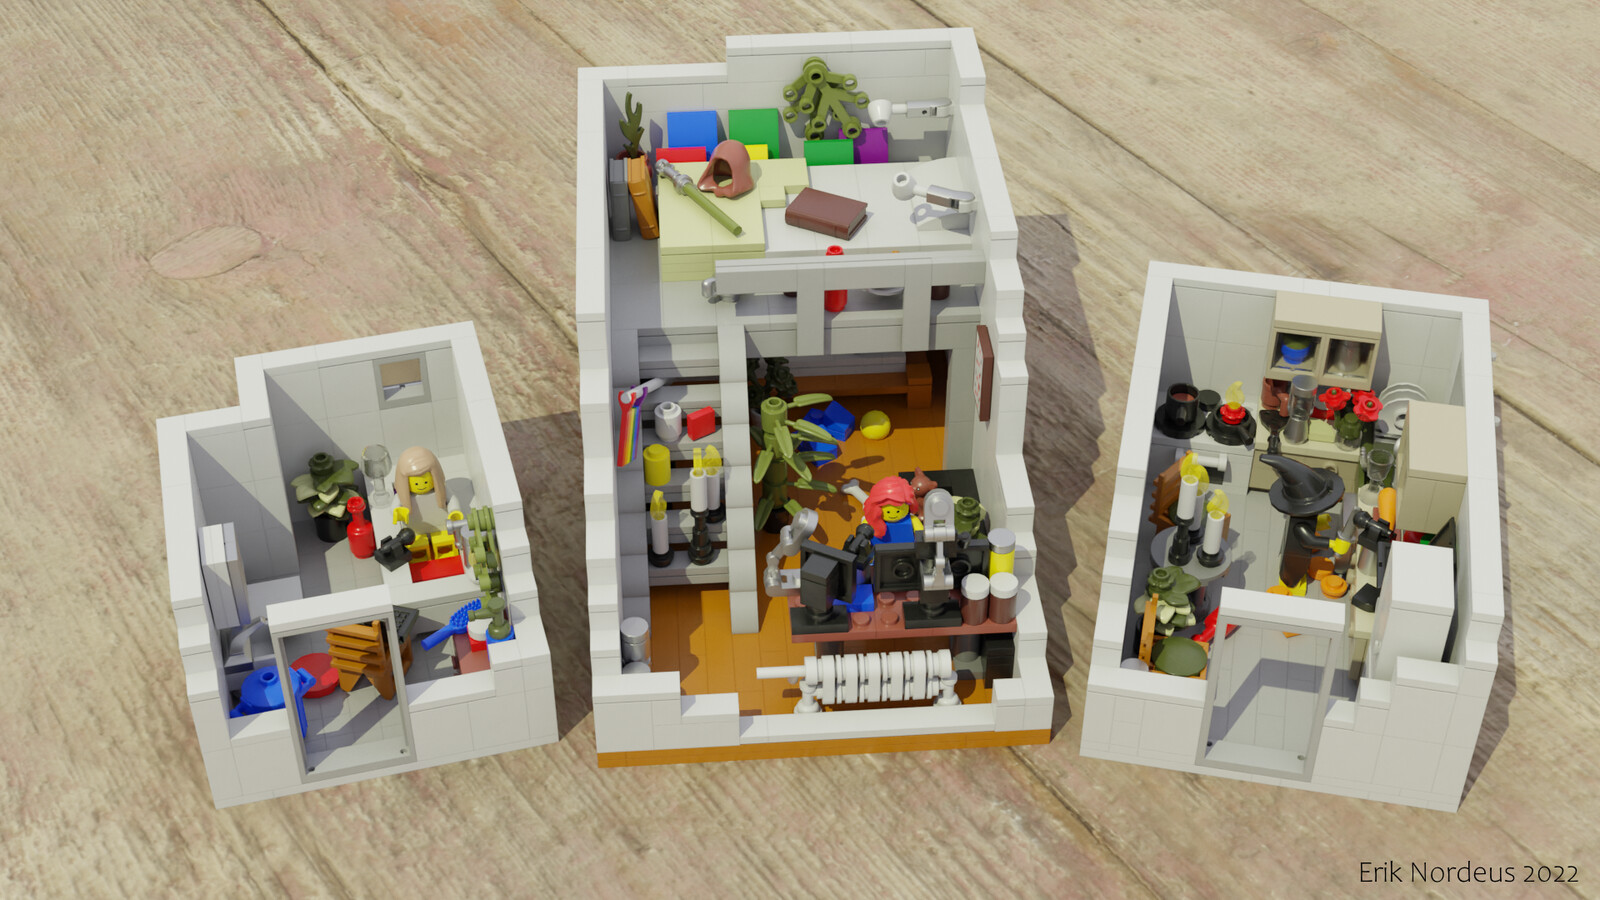 The LEGO set has three rooms consisting of roughly 1200 LEGO bricks. 